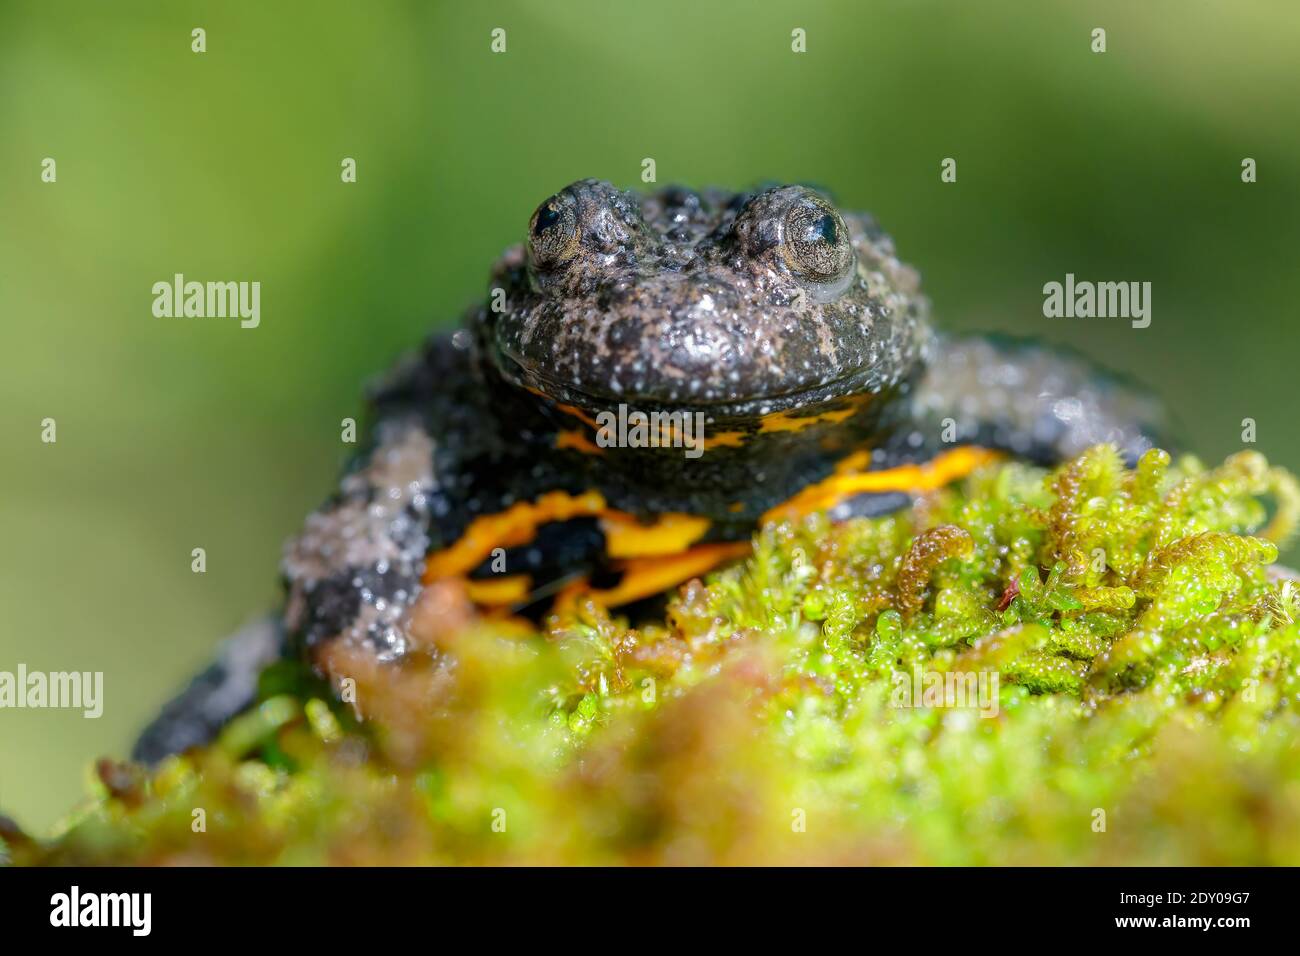 Apennine Yellow-bellied Toad (Bombina pachypus), front view of an adult on some moss, Campania, Italy Stock Photo